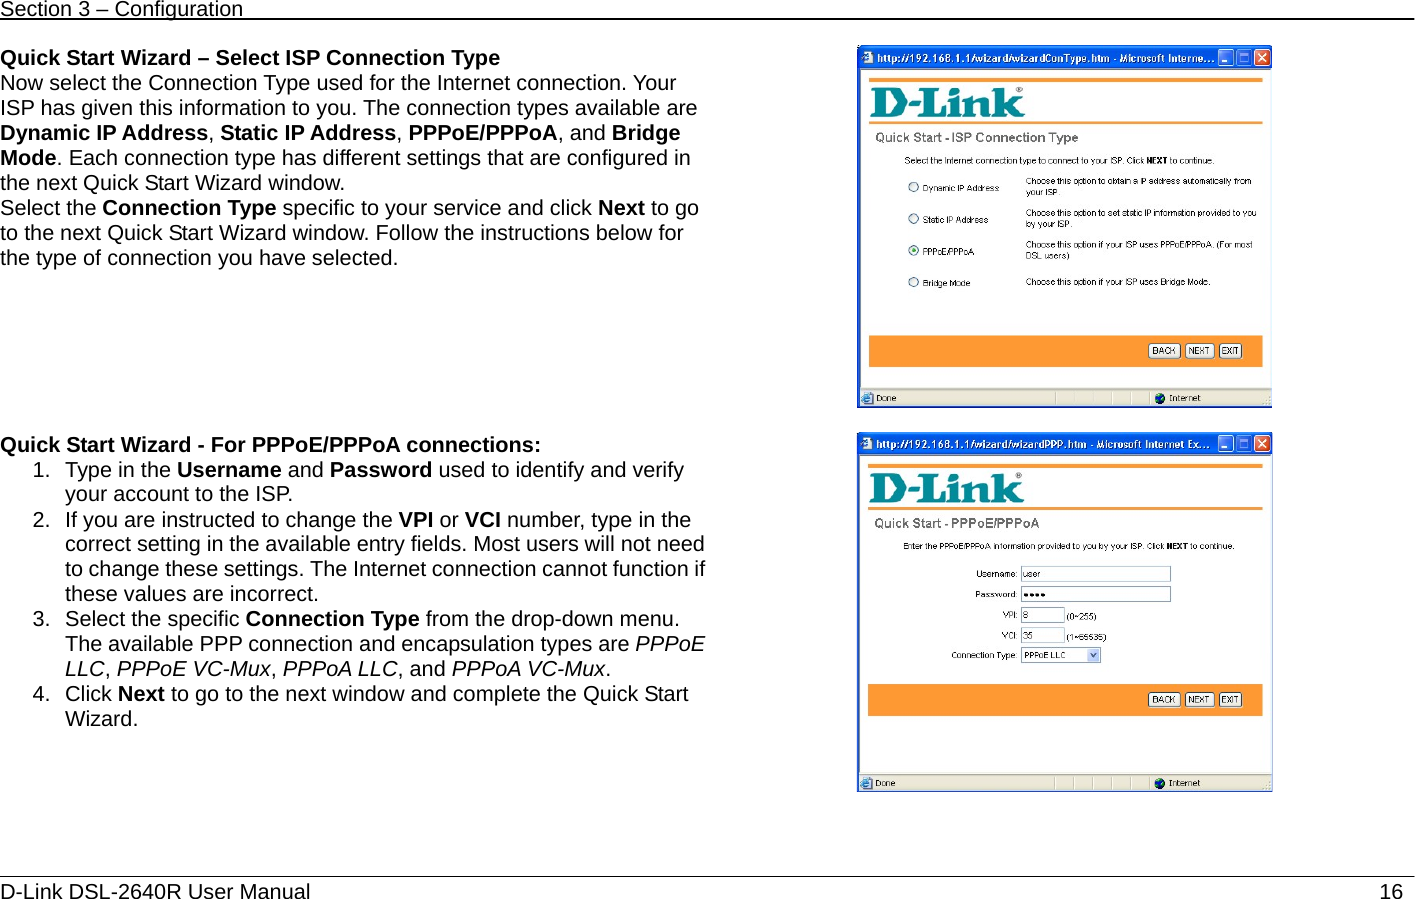 Section 3 – Configuration   D-Link DSL-2640R User Manual                           16Quick Start Wizard – Select ISP Connection Type Now select the Connection Type used for the Internet connection. Your ISP has given this information to you. The connection types available are Dynamic IP Address, Static IP Address, PPPoE/PPPoA, and Bridge Mode. Each connection type has different settings that are configured in the next Quick Start Wizard window. Select the Connection Type specific to your service and click Next to go to the next Quick Start Wizard window. Follow the instructions below for the type of connection you have selected.    Quick Start Wizard - For PPPoE/PPPoA connections:   1. Type in the Username and Password used to identify and verify your account to the ISP.   2.  If you are instructed to change the VPI or VCI number, type in the correct setting in the available entry fields. Most users will not need to change these settings. The Internet connection cannot function if these values are incorrect. 3. Select the specific Connection Type from the drop-down menu. The available PPP connection and encapsulation types are PPPoE LLC, PPPoE VC-Mux, PPPoA LLC, and PPPoA VC-Mux. 4. Click Next to go to the next window and complete the Quick Start Wizard.  